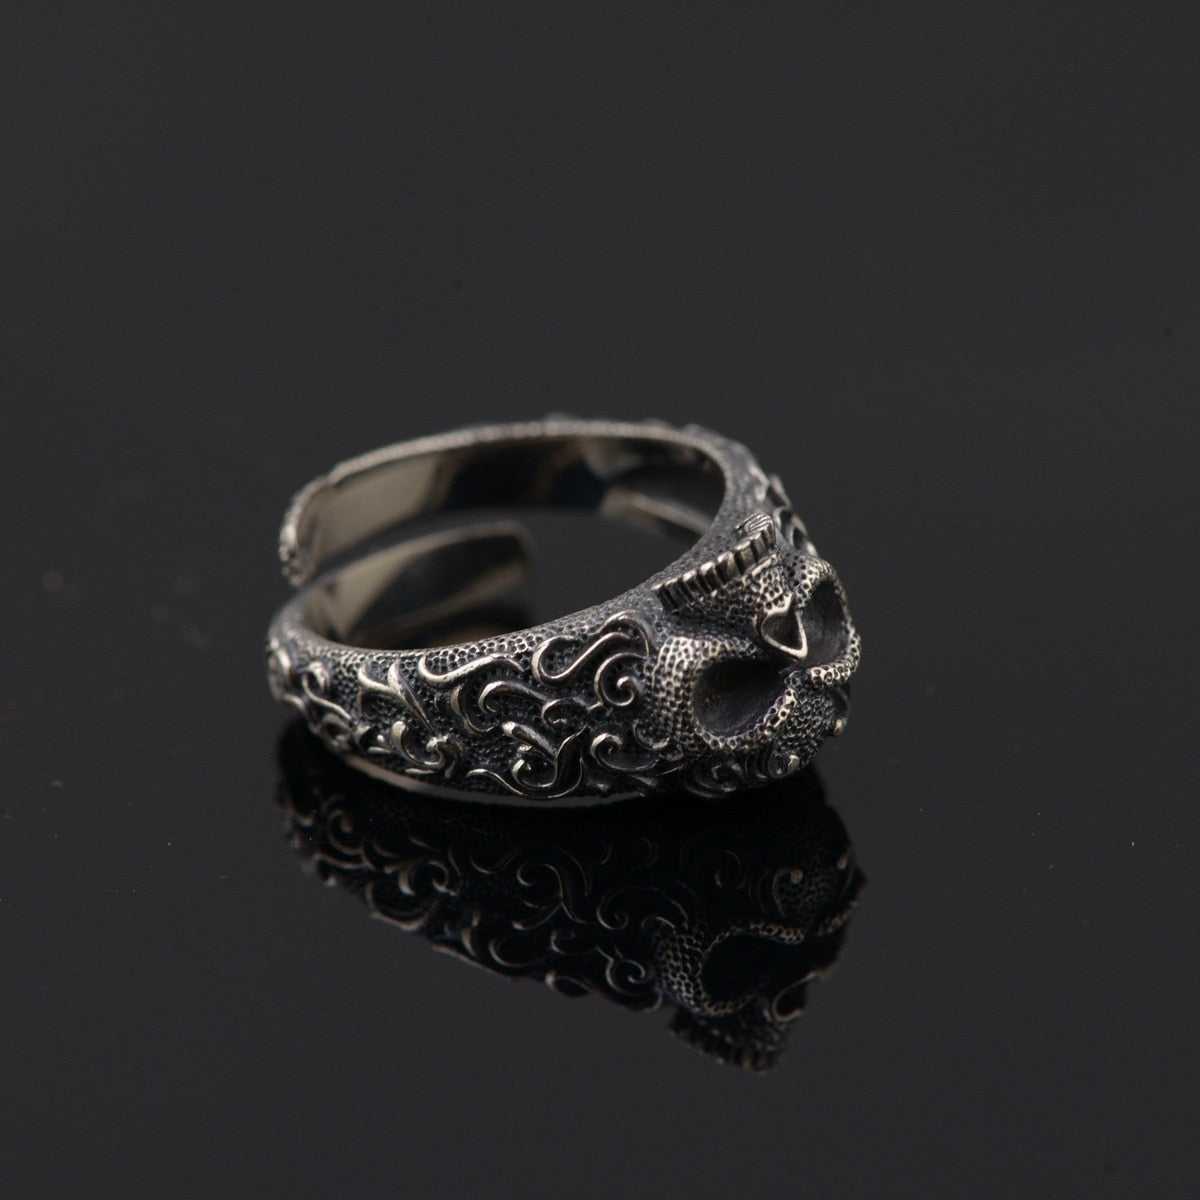 The Gentle Skull 925 Sterling Silver Band